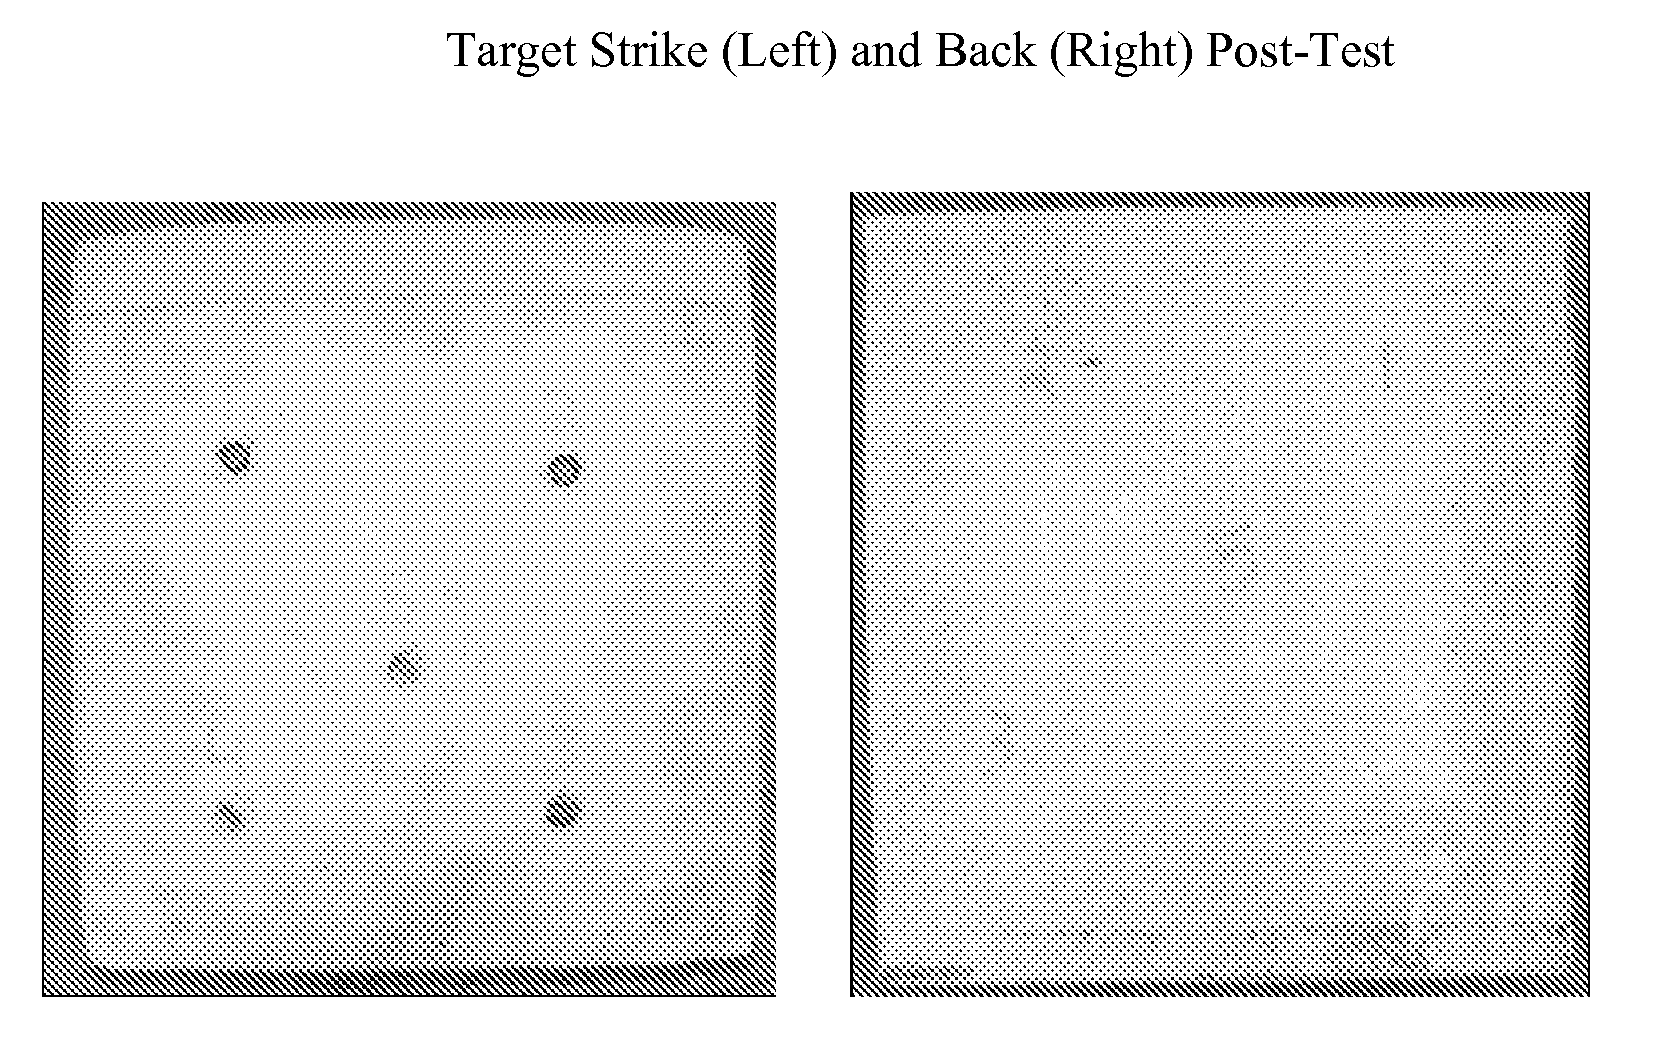 Products and methods for ballistic damage mitigation and blast damage suppression